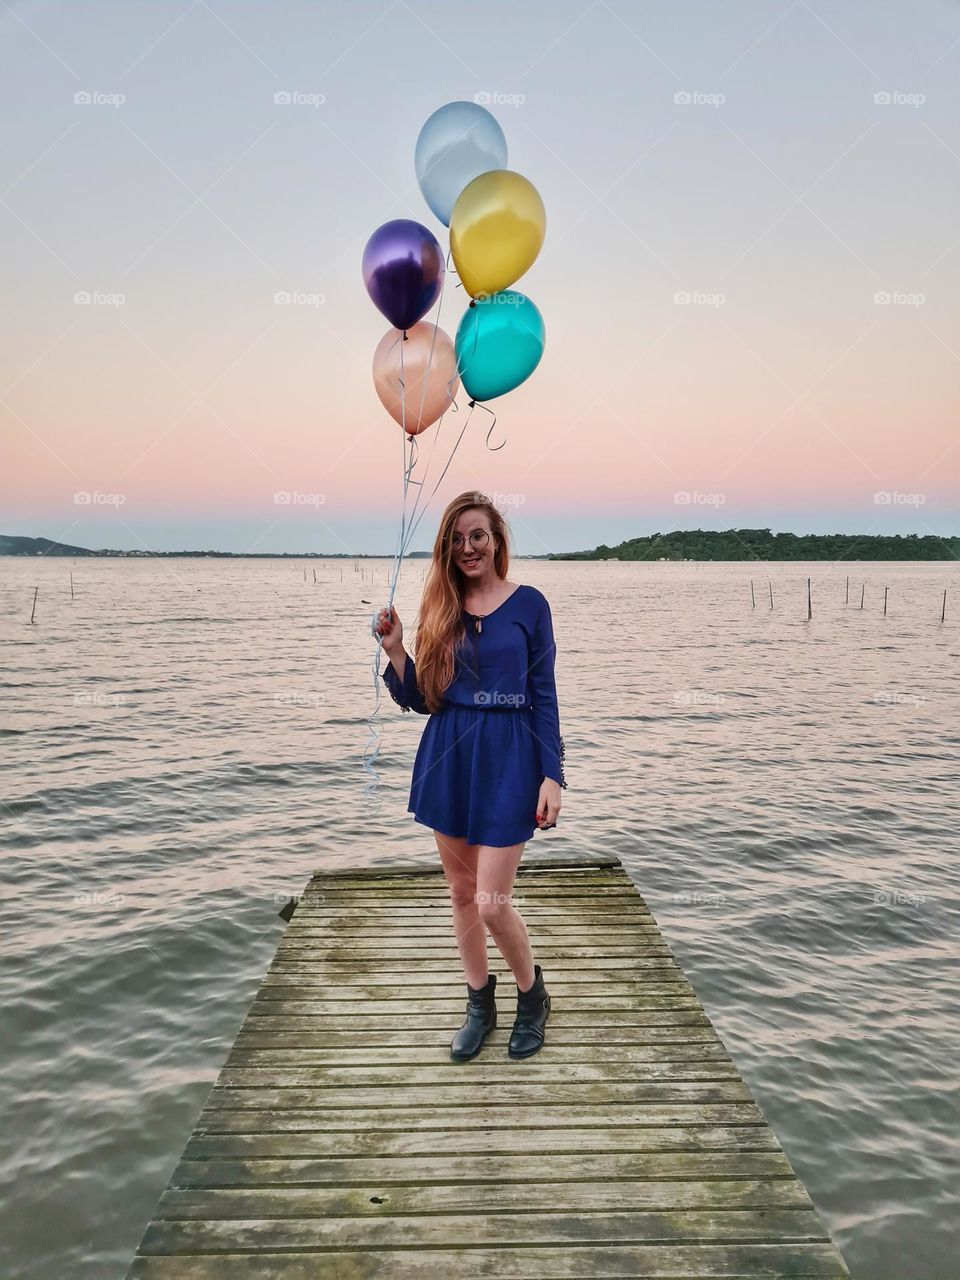 Sunset and baloons